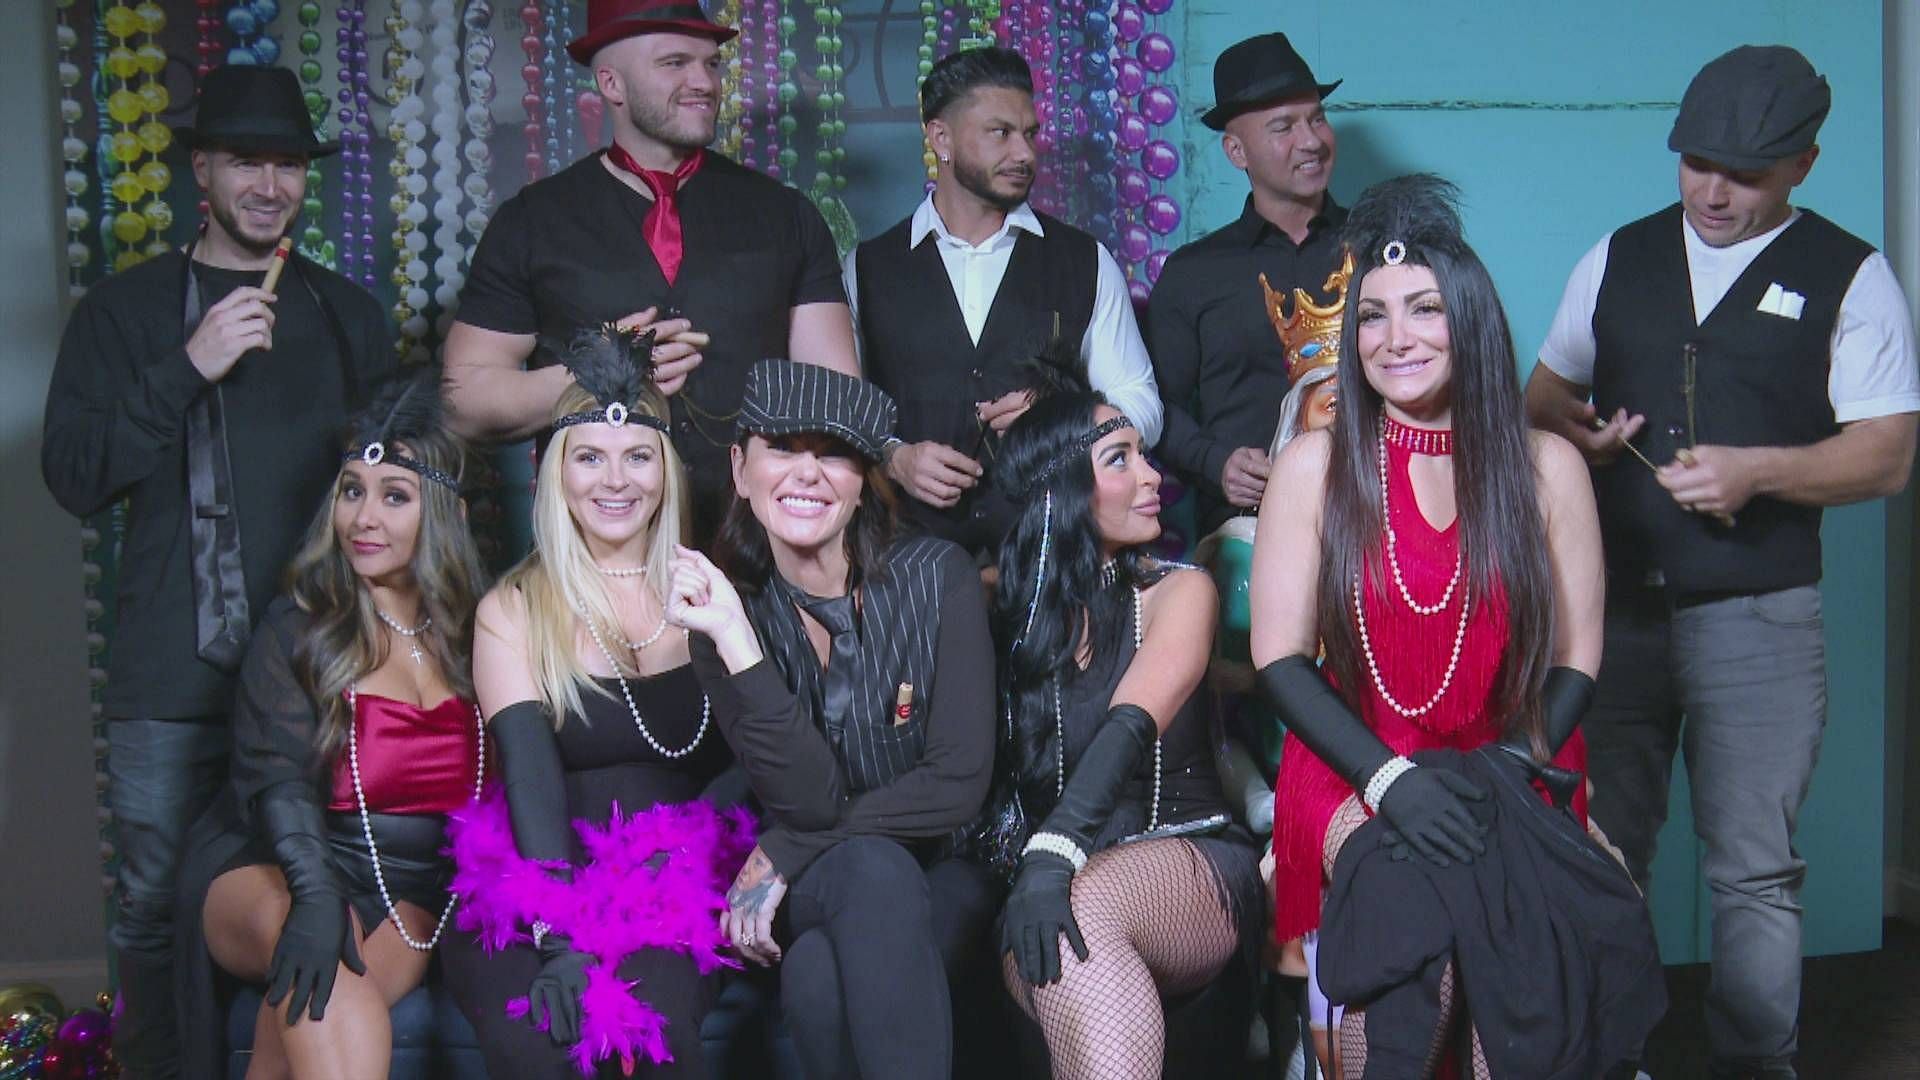 The cast of Jersey Shore: Family Vacation season 6 on episode 11 (Image via MTV)